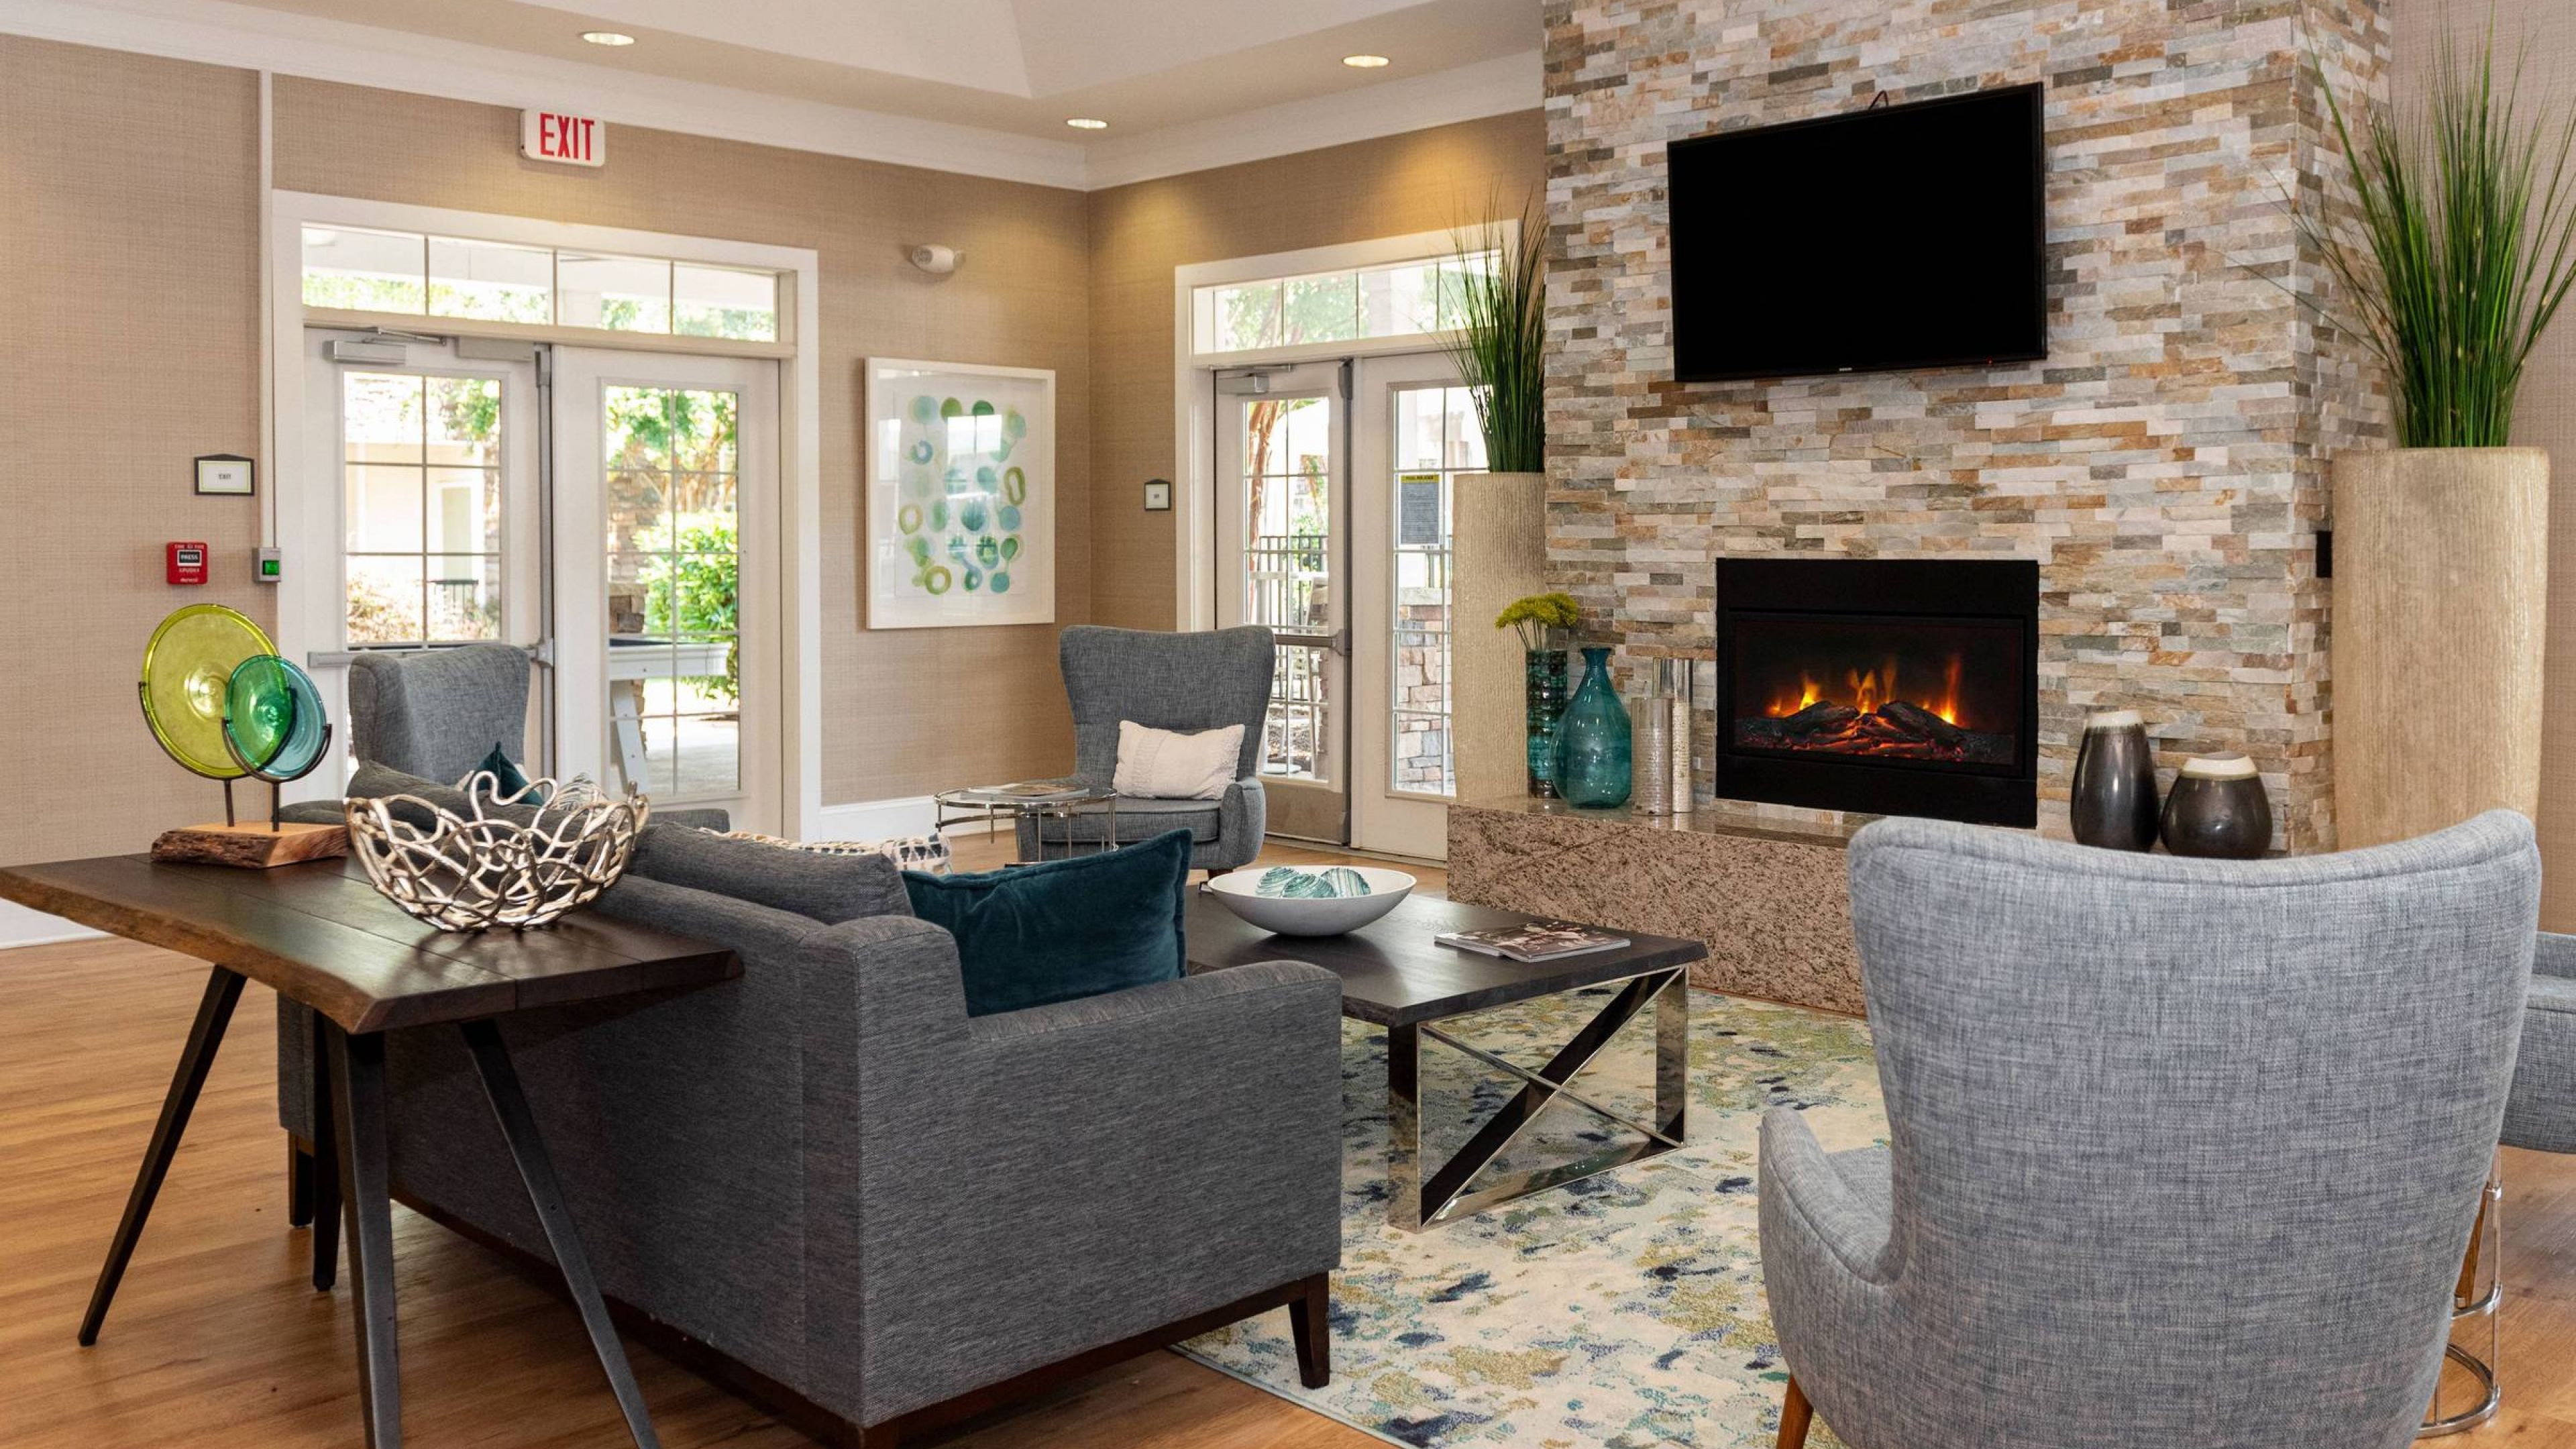 Hawthorne at the Summit resident clubhouse amenity with seating area and beautiful finishes